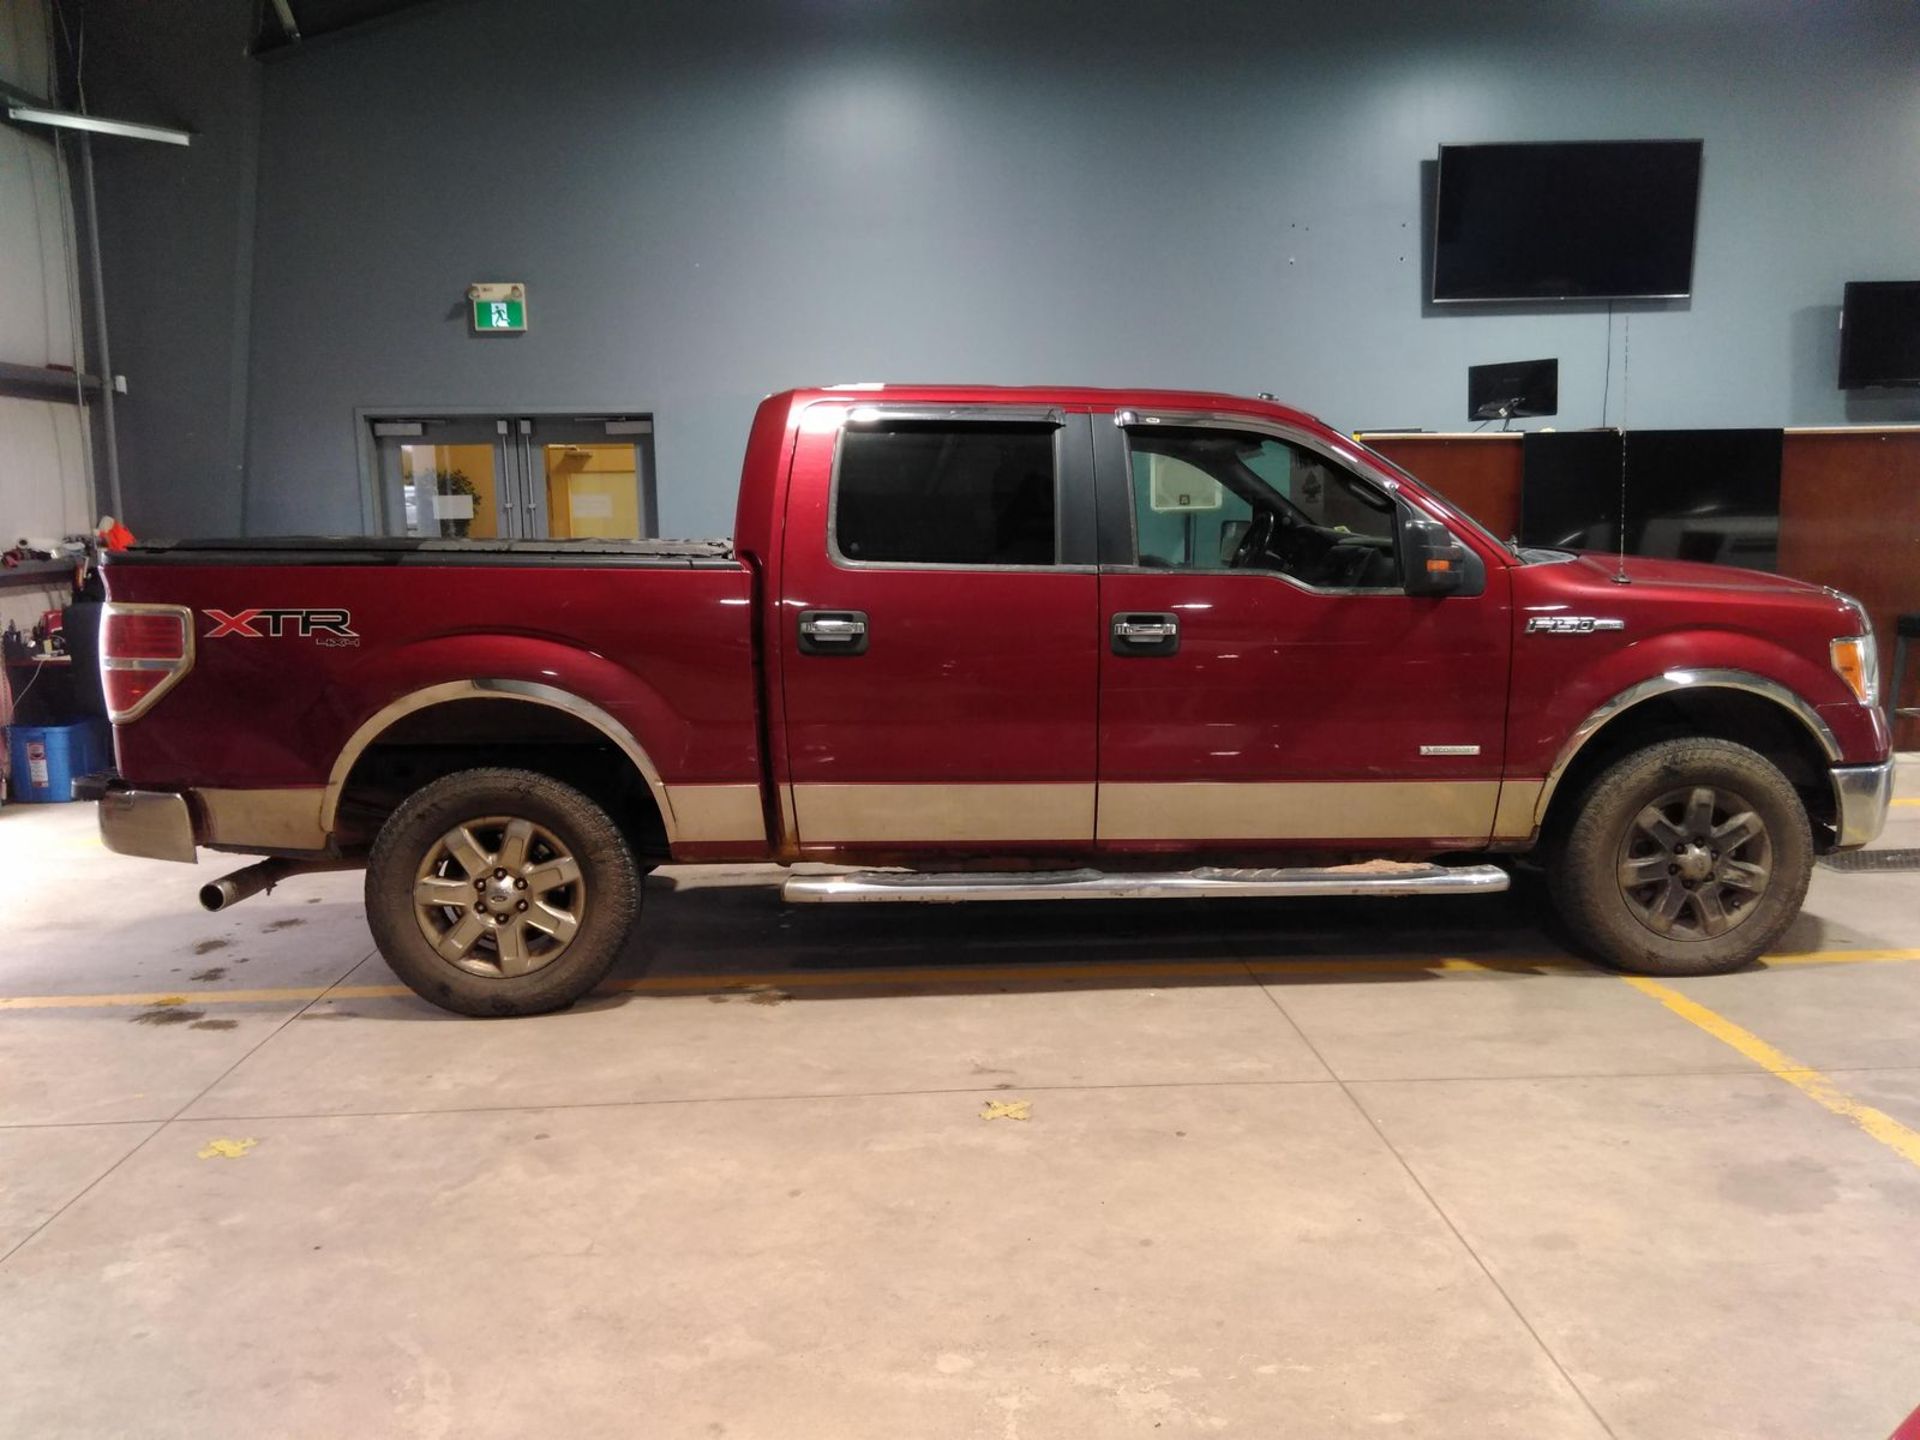 ** ON SALE ** Ford F-150 3.5L V6 XLT XTR Super Crew '2014 Year' Fresh Import - A/C - 4WD - Image 4 of 10